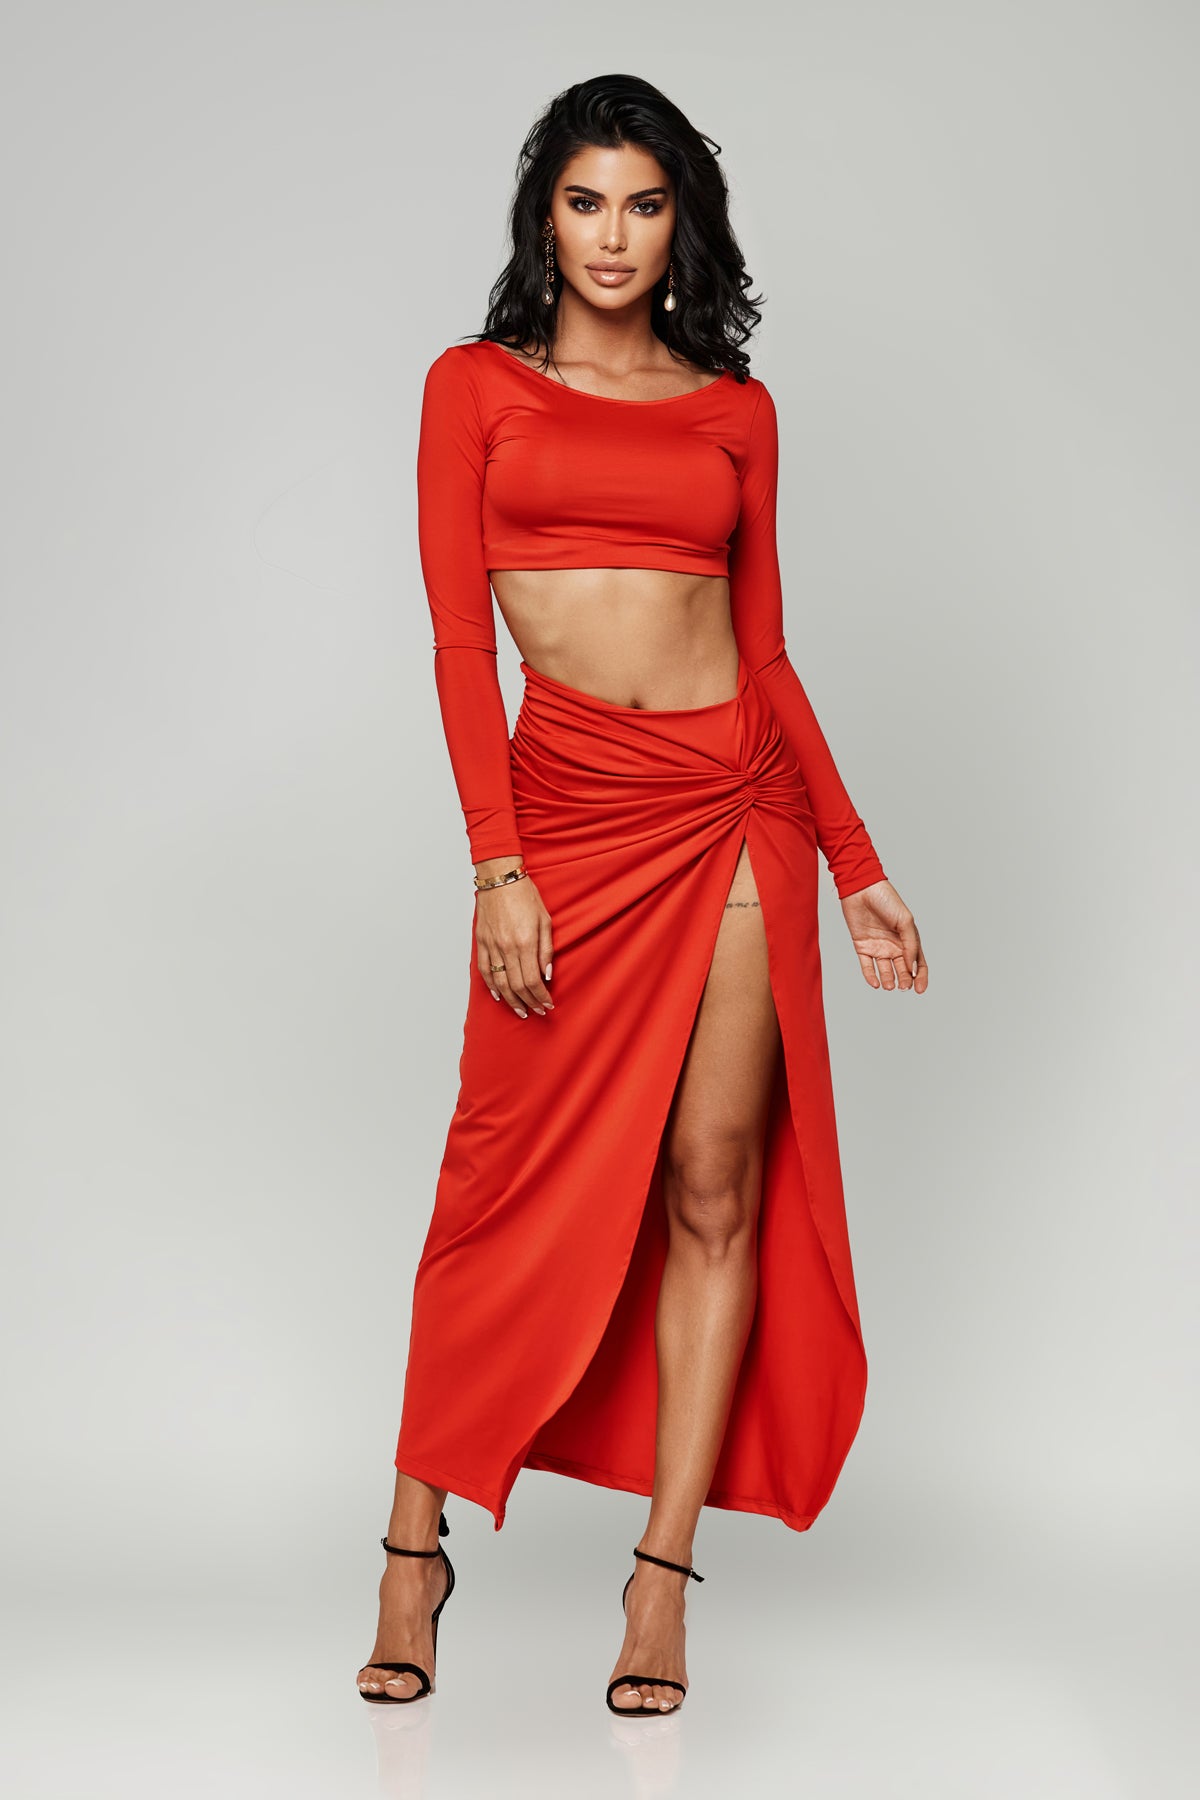 Love Affair Set Cropped Top With Skirt - Red